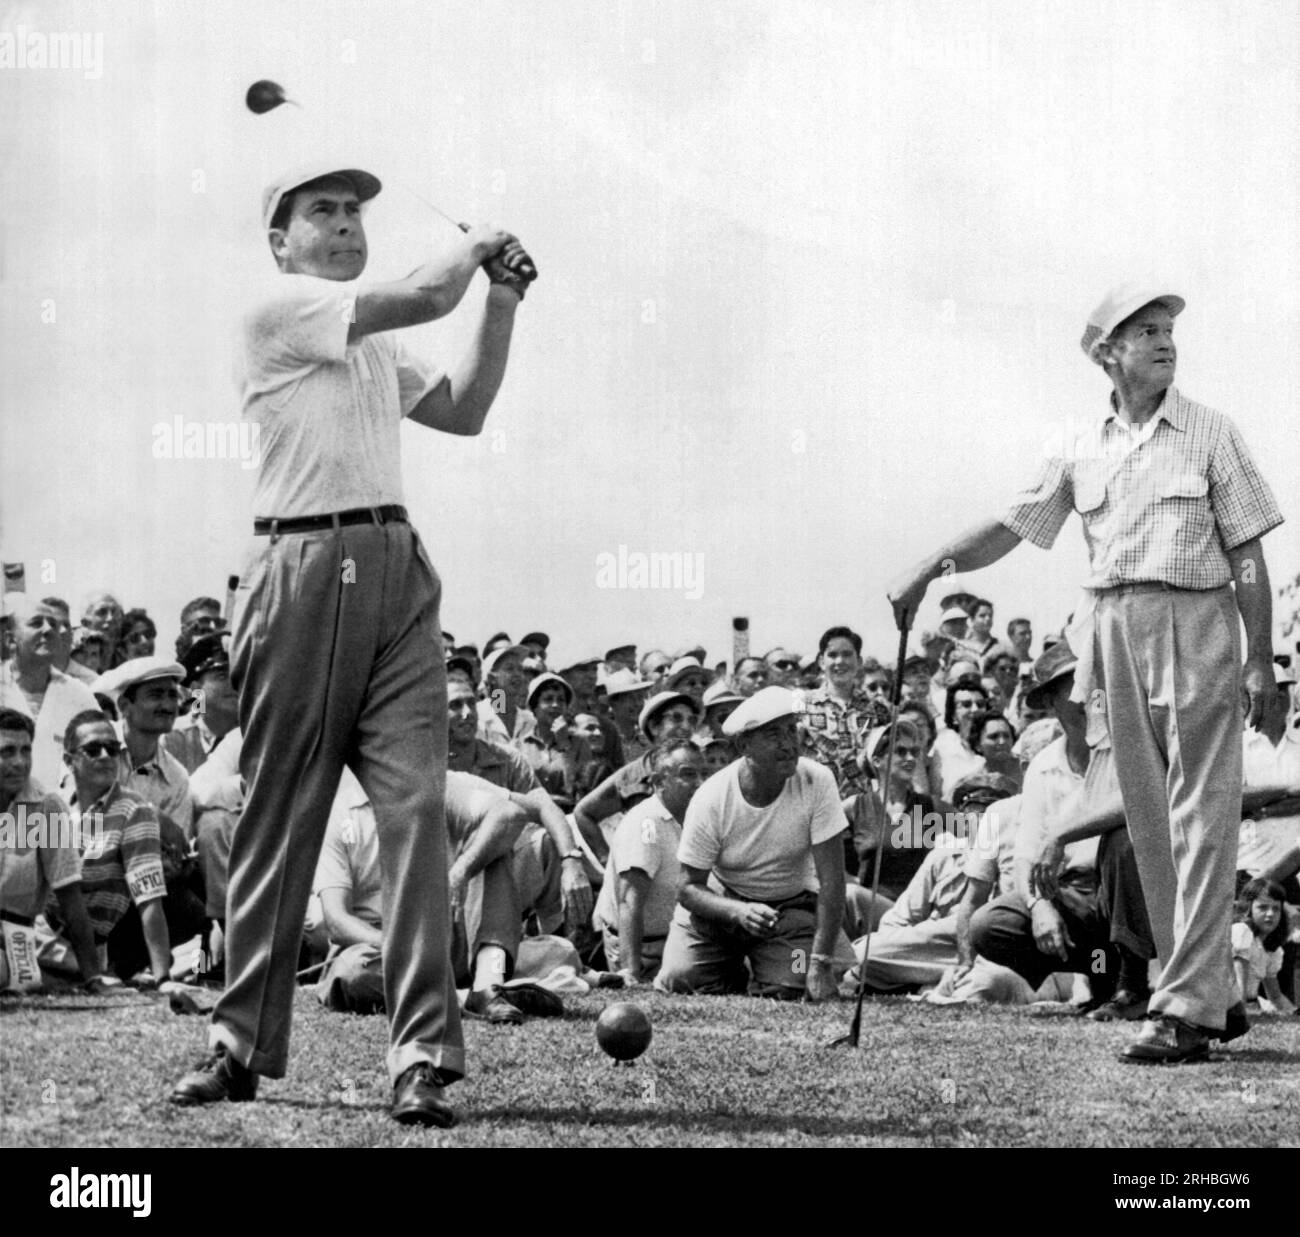 Rockville, Maryland: 1953 Vice-President Richard Nixon tees off at the National Celebrities Open Tournament at the Woodmont Country Club. Bob Hope at right smiles as he watches the ball heading for spectators. Nixon, a newcomer to the sport, twice sent spectators ducking on the first hole. Stock Photo